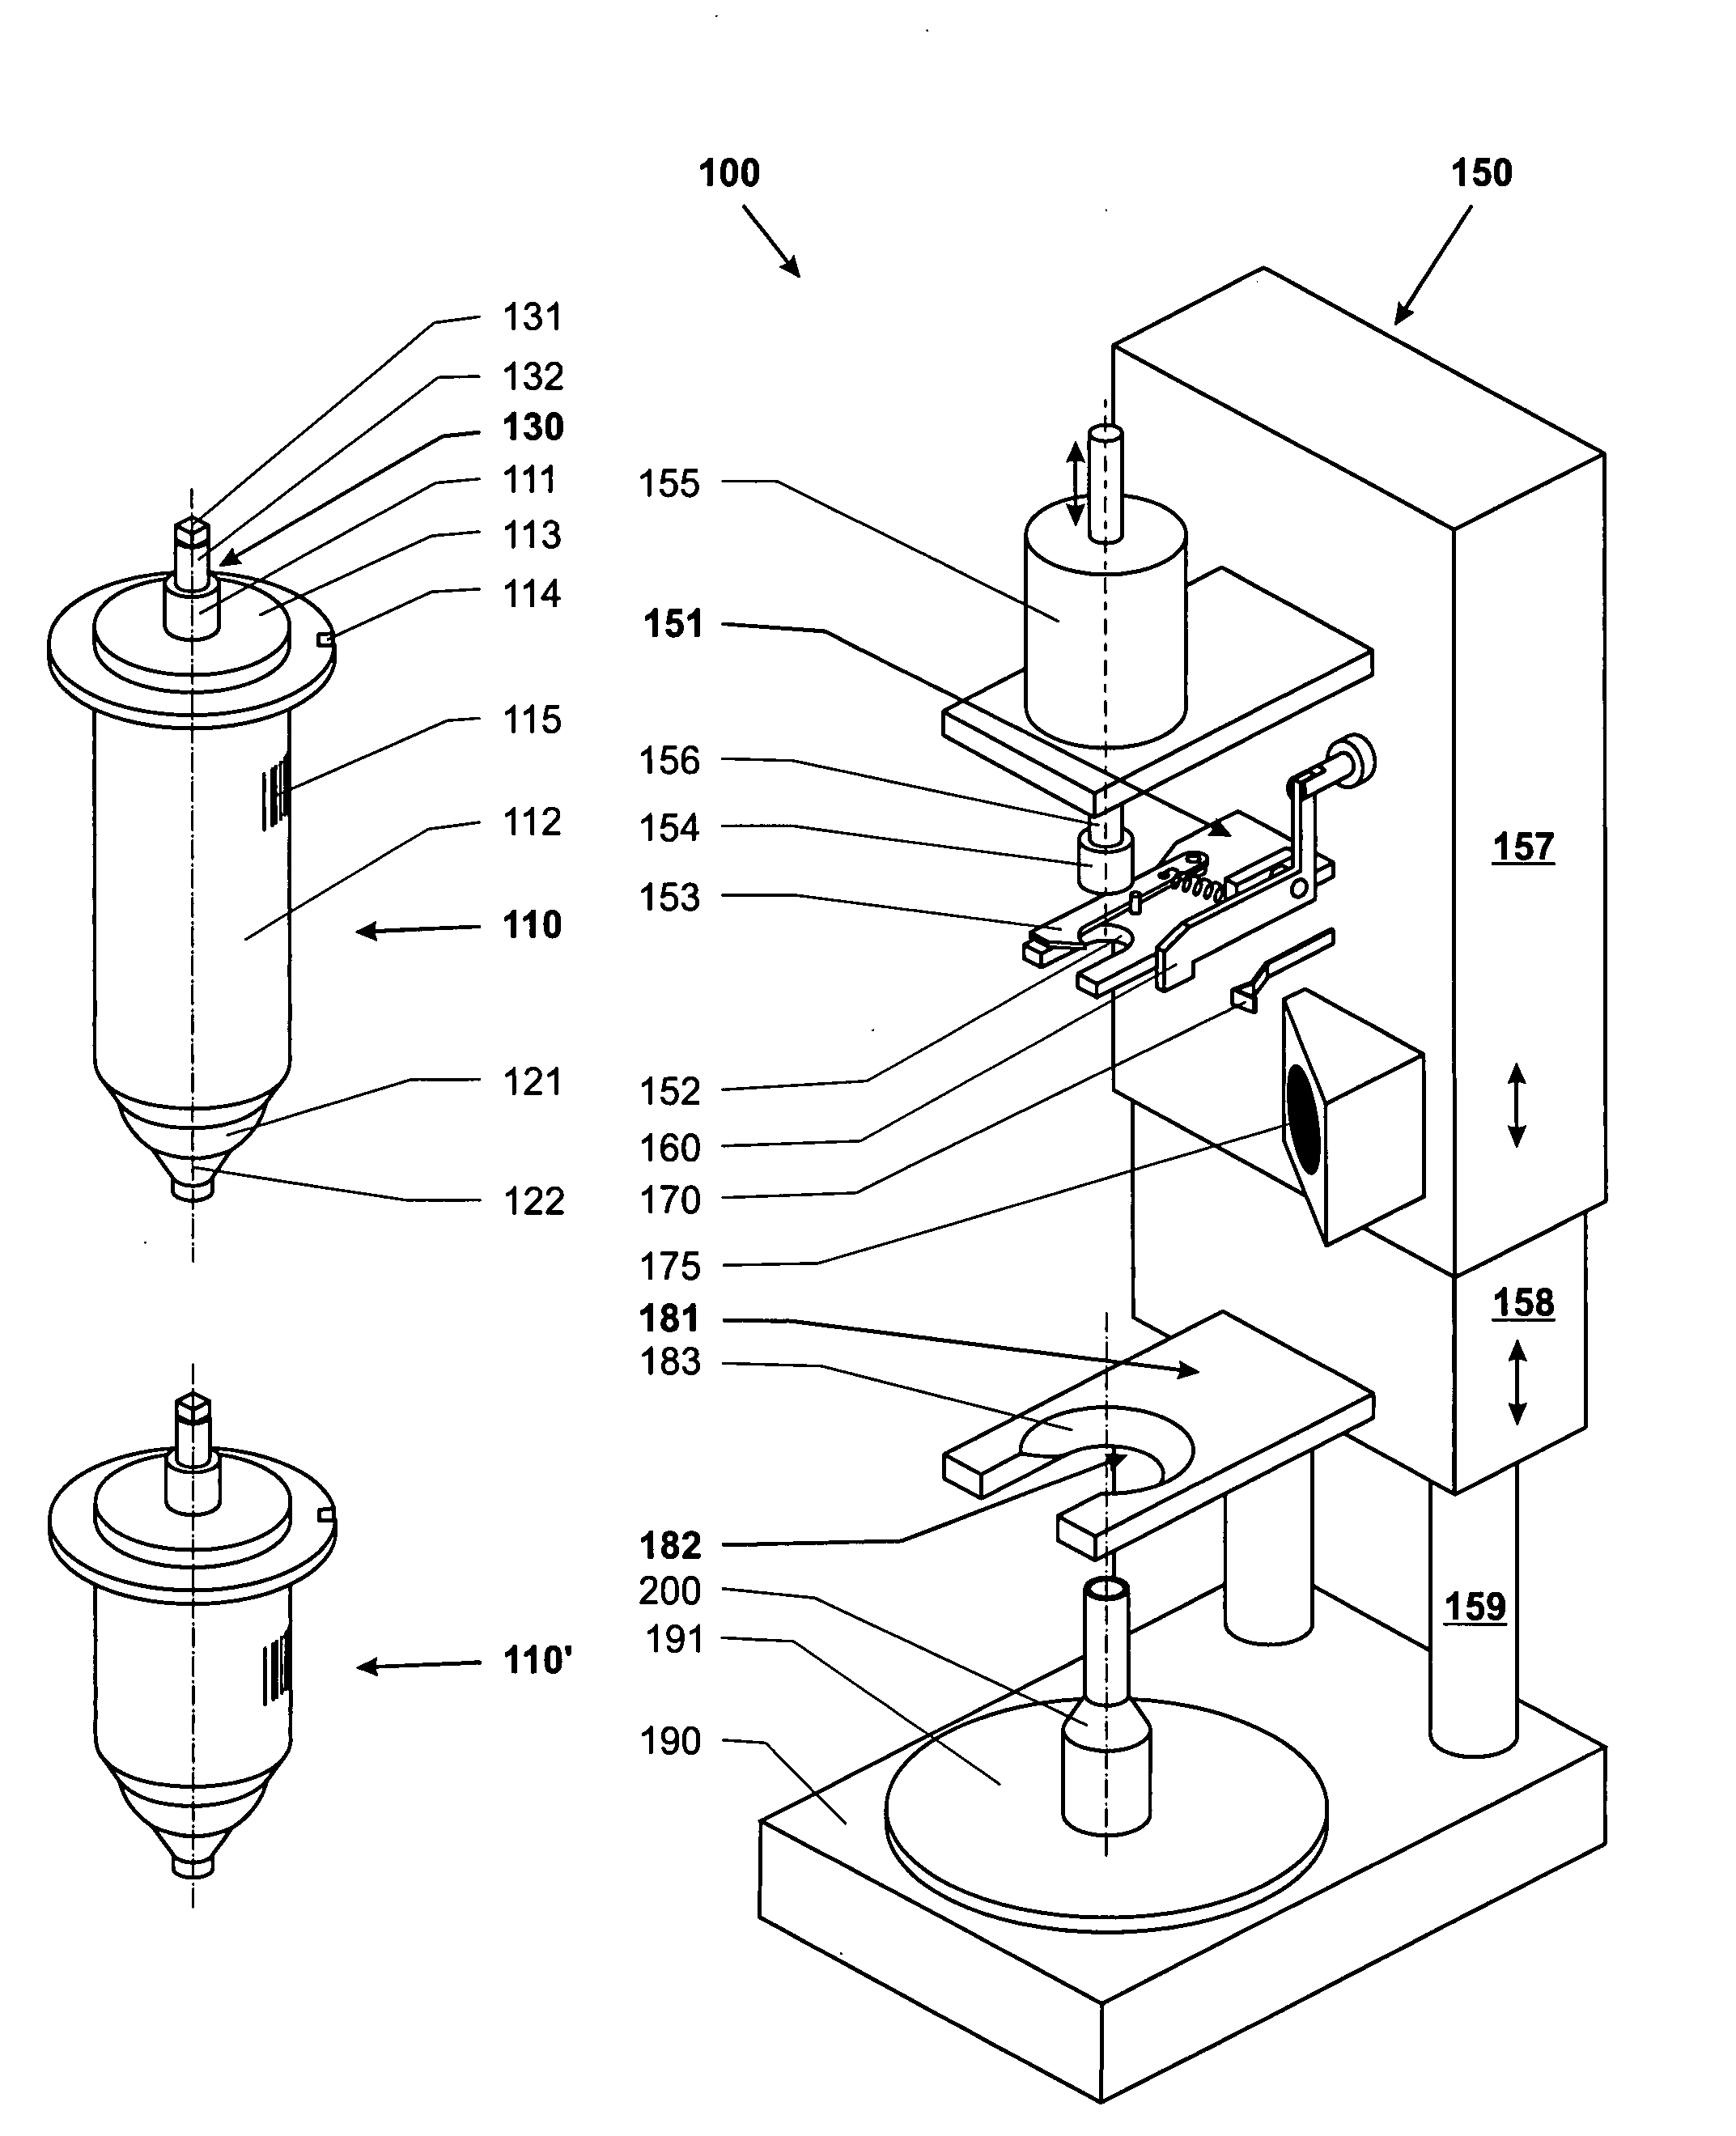 Dosage-dispensing device for powders or pastes